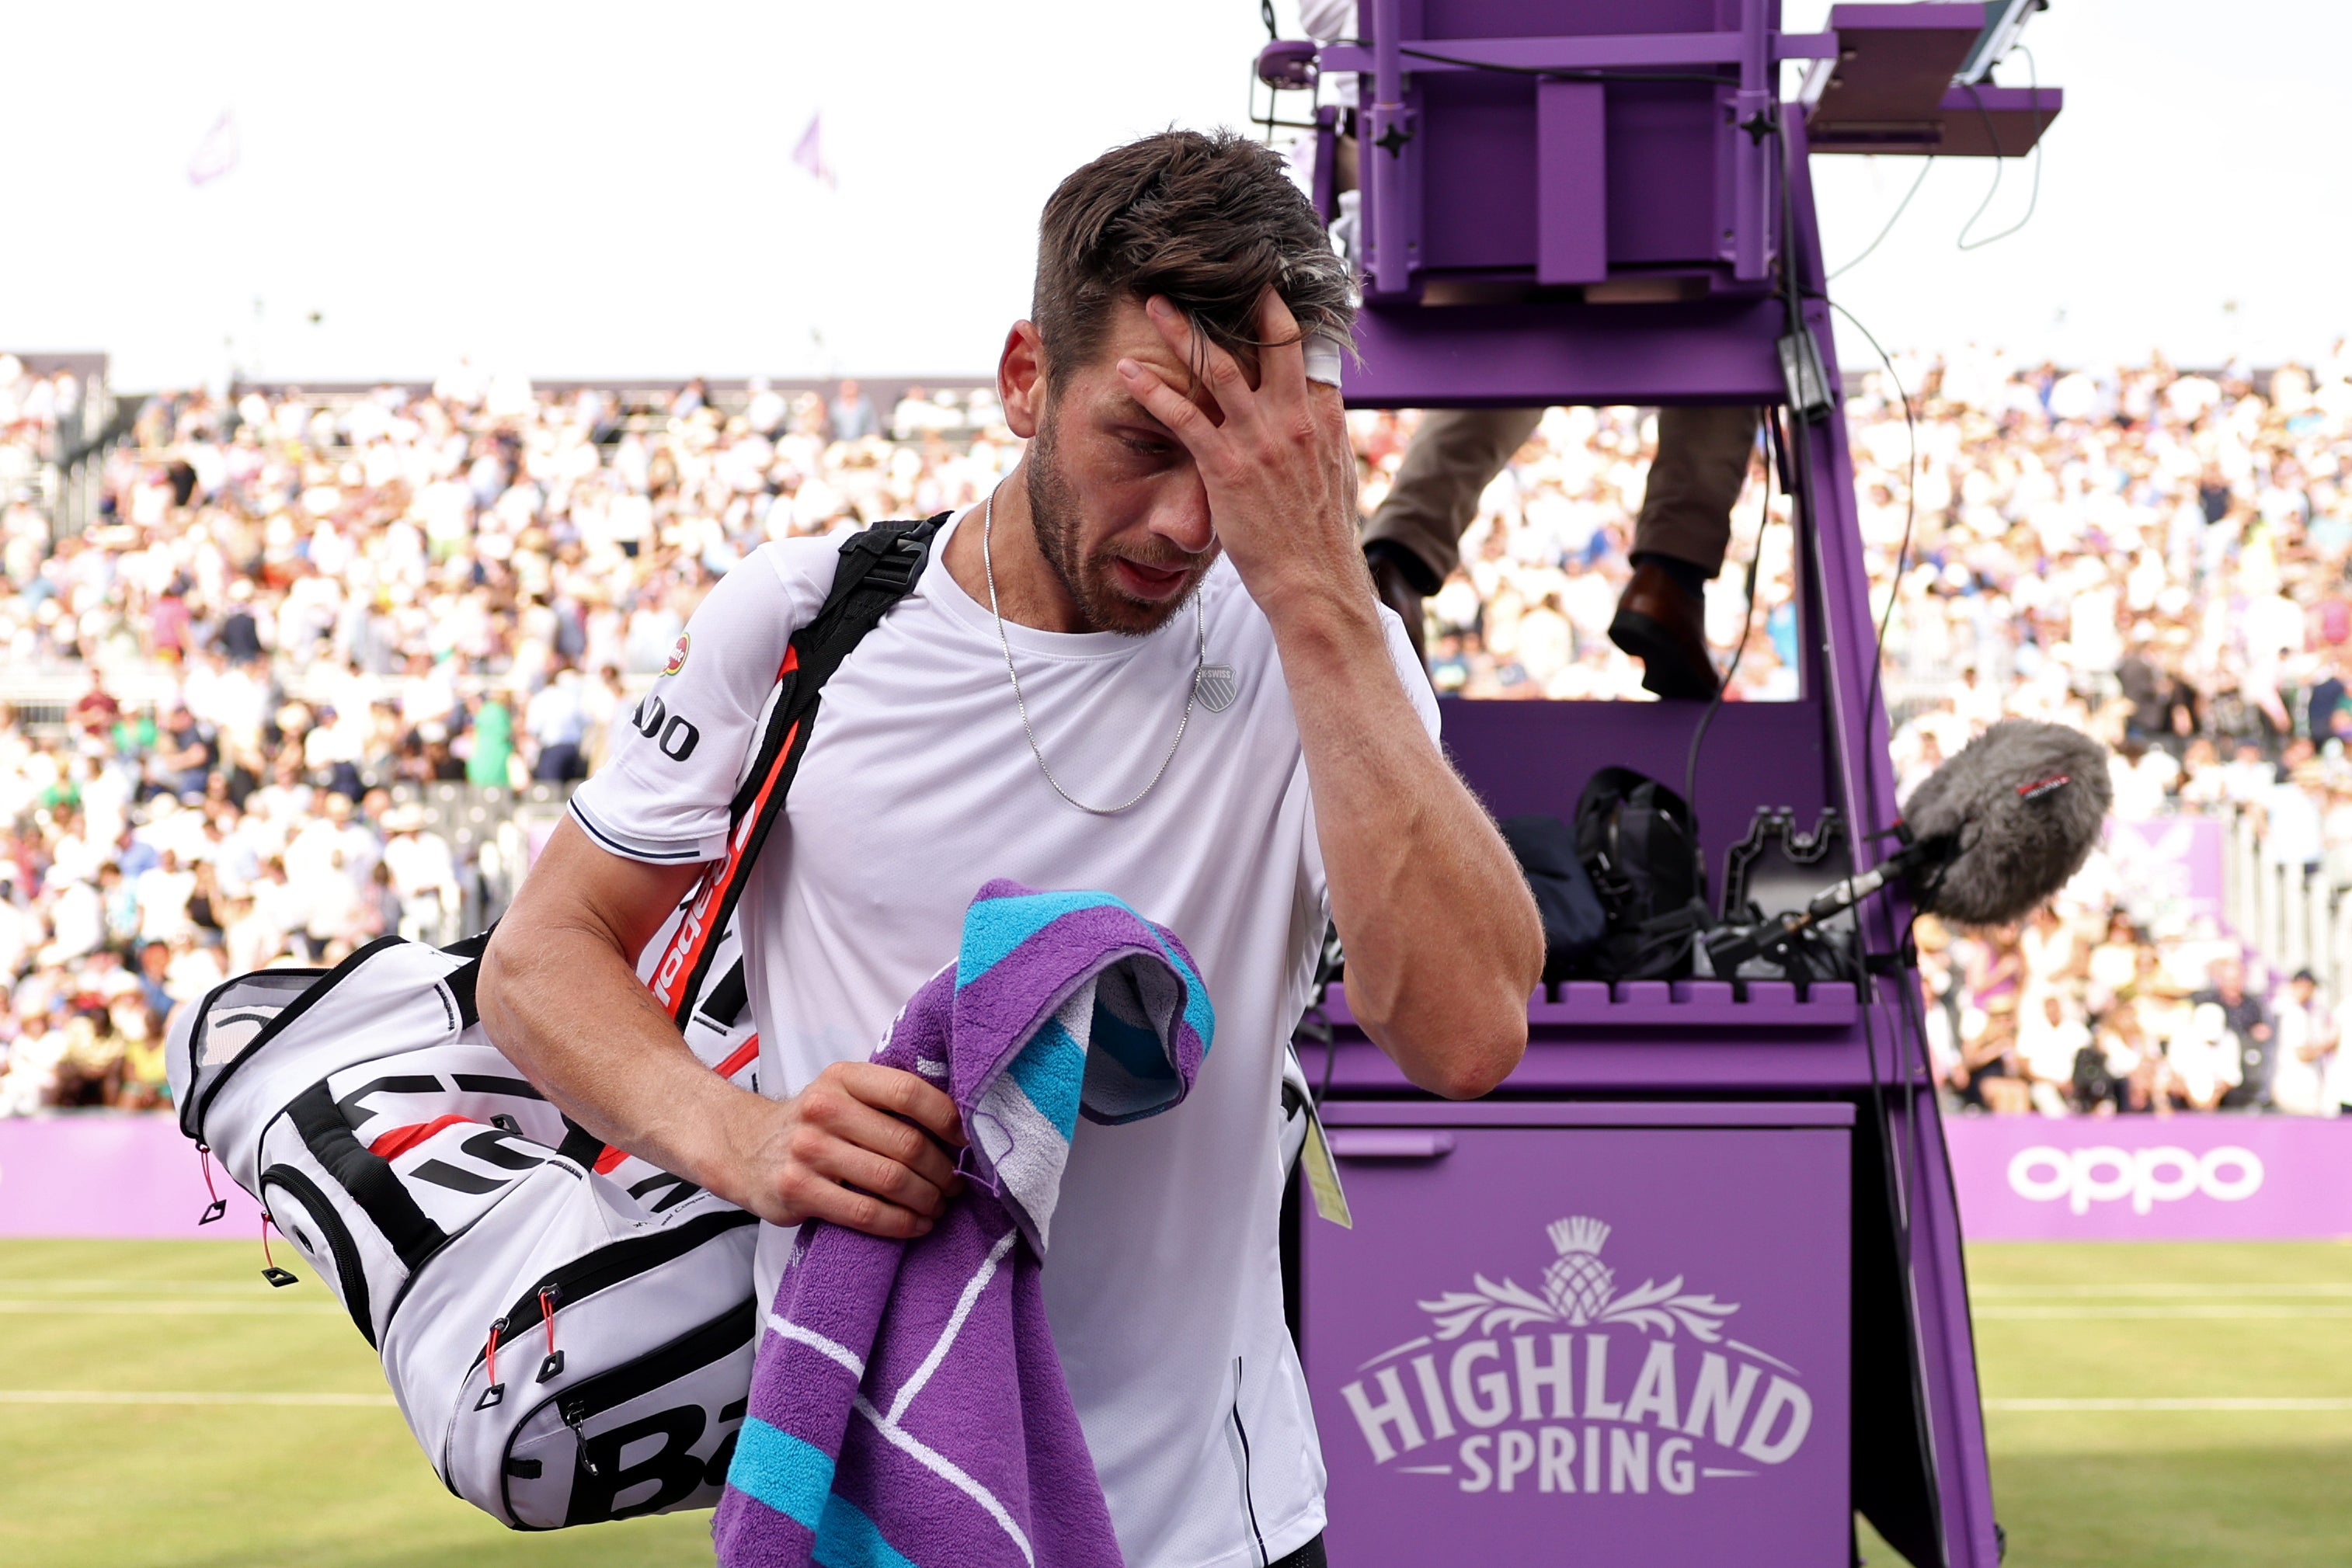 Cameron Norrie reacts after his defeat in the Queen’s quarter-final